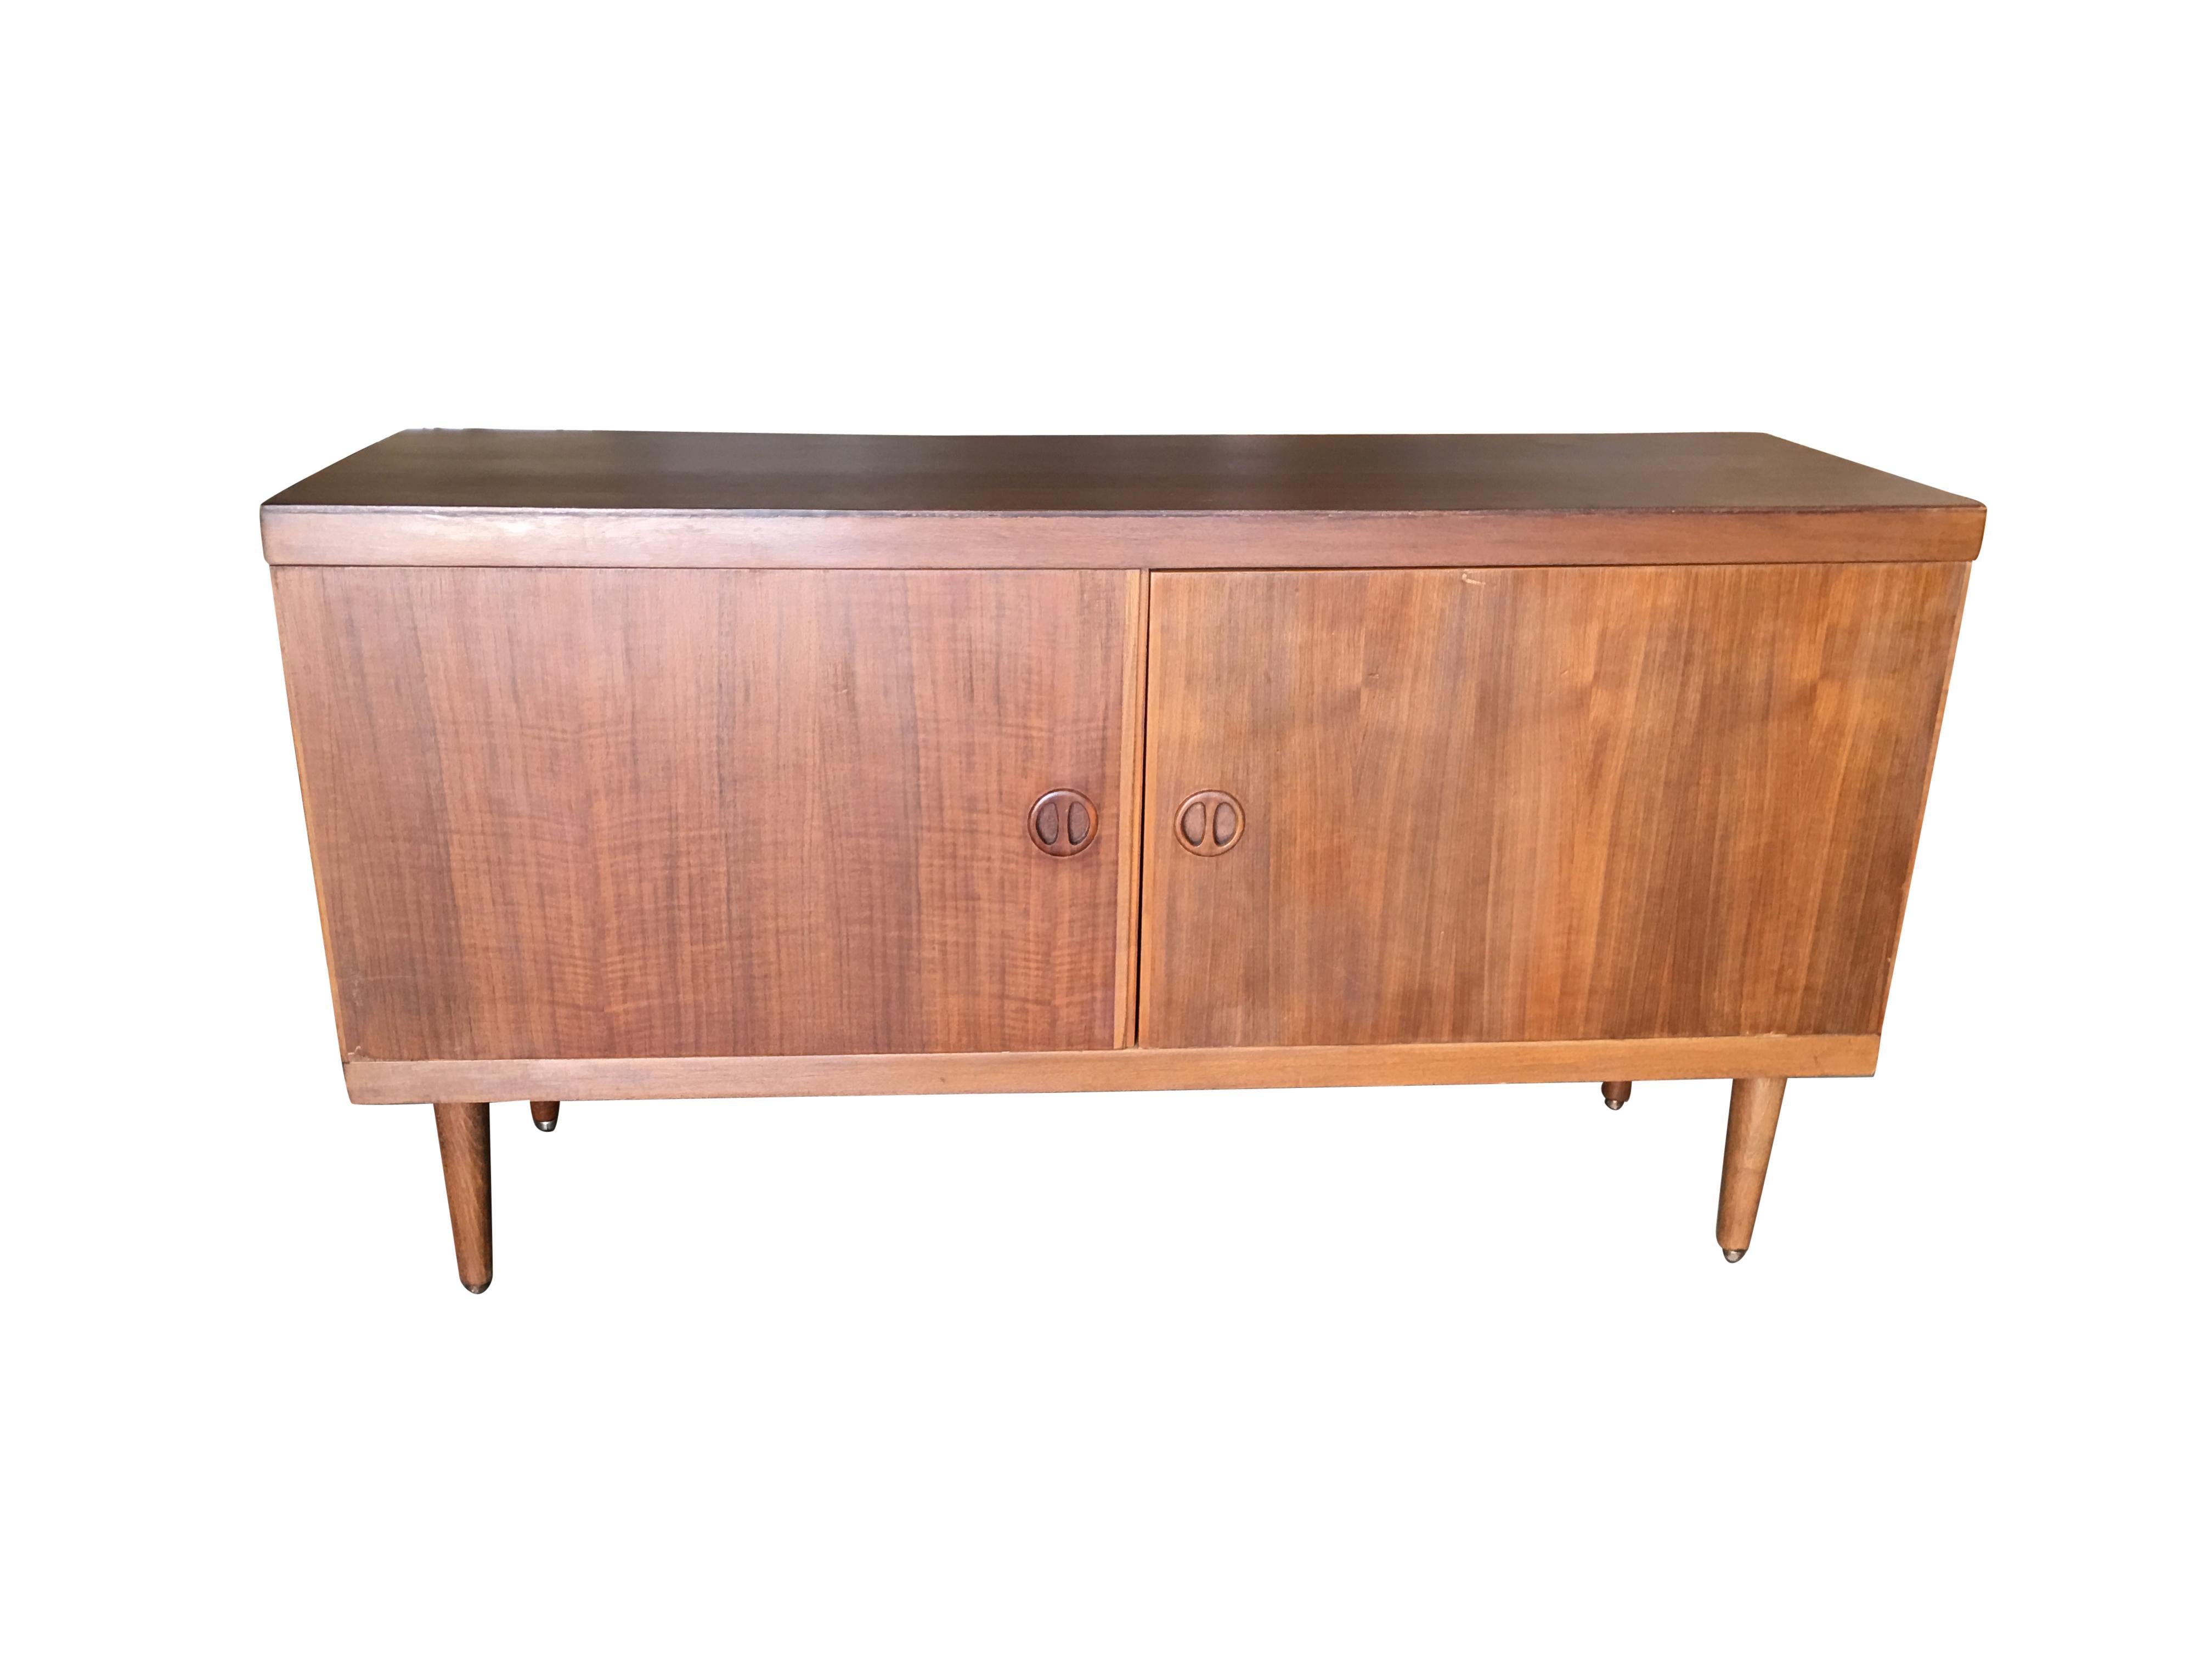 This small Danish style rose stained credenza cabinet with tapered legs, sculpted pig nose pulls, fancy hinges and two easy swing doors. It features two large chubby spaces for storage. 

The cabinet is a great size for a smaller dwelling or for